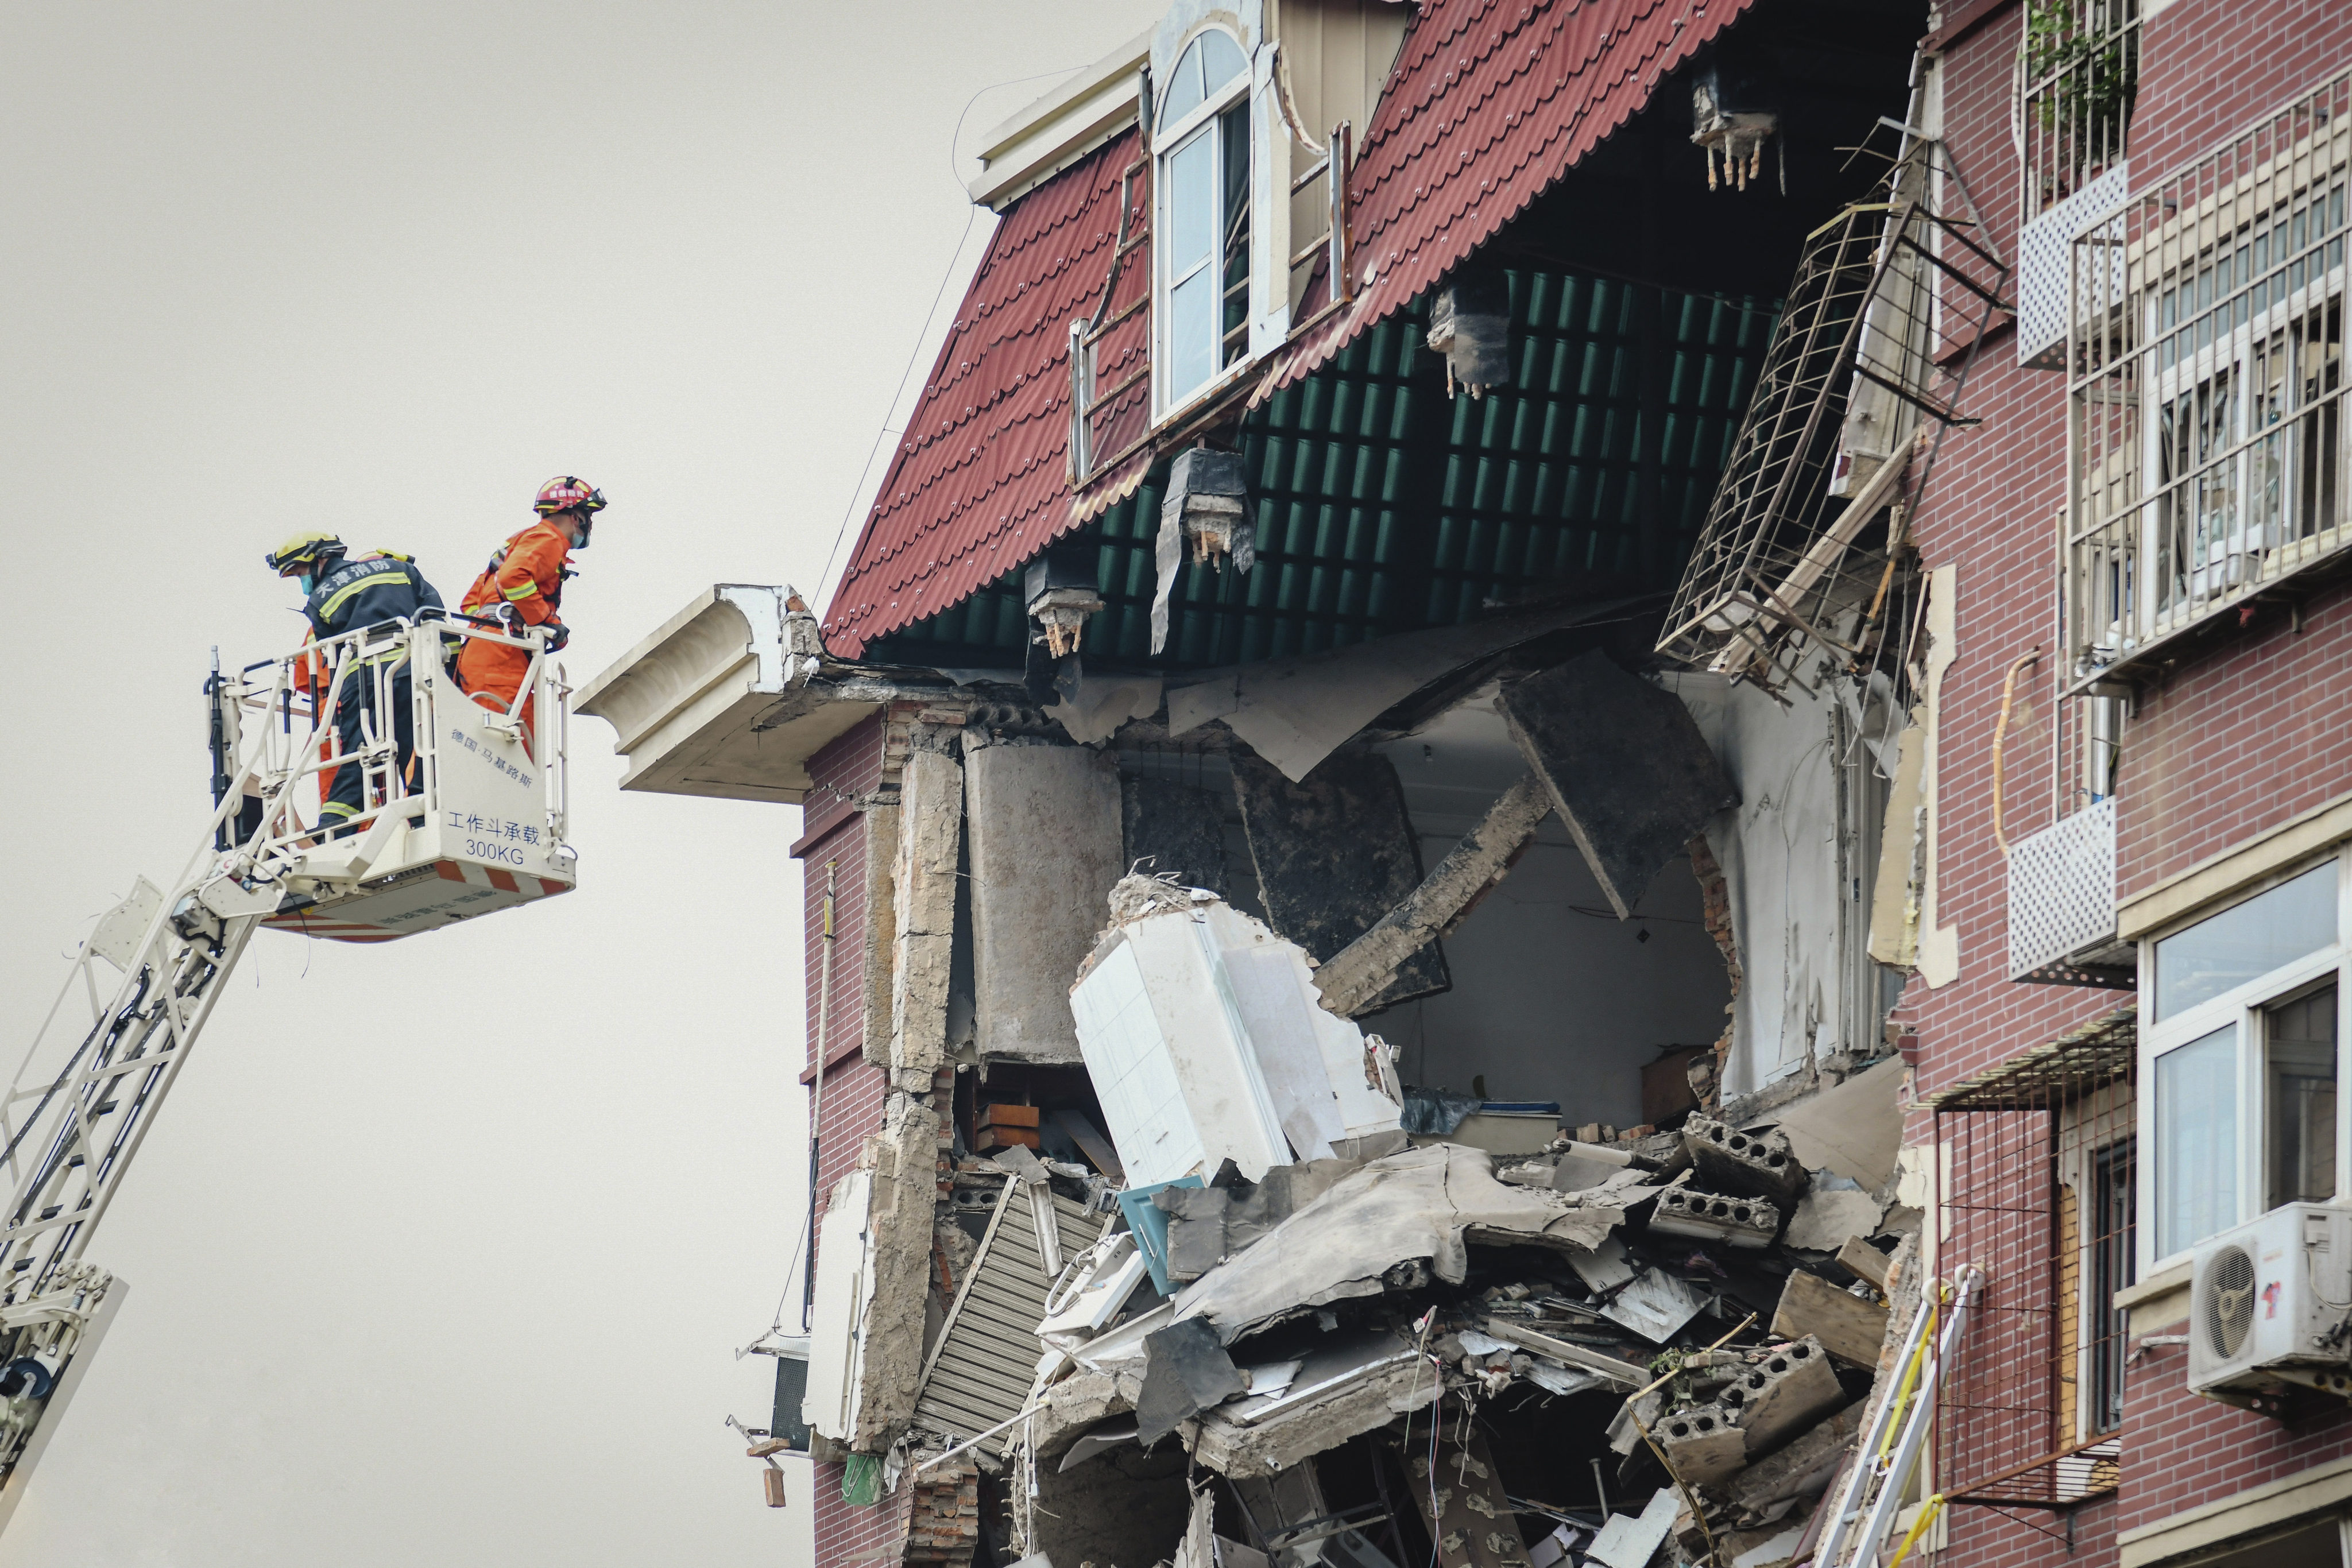 A firefighter looks into the partially collapsed section of a building in Tianjin after an explosion on Tuesday. Photo: Chinatopix via AP